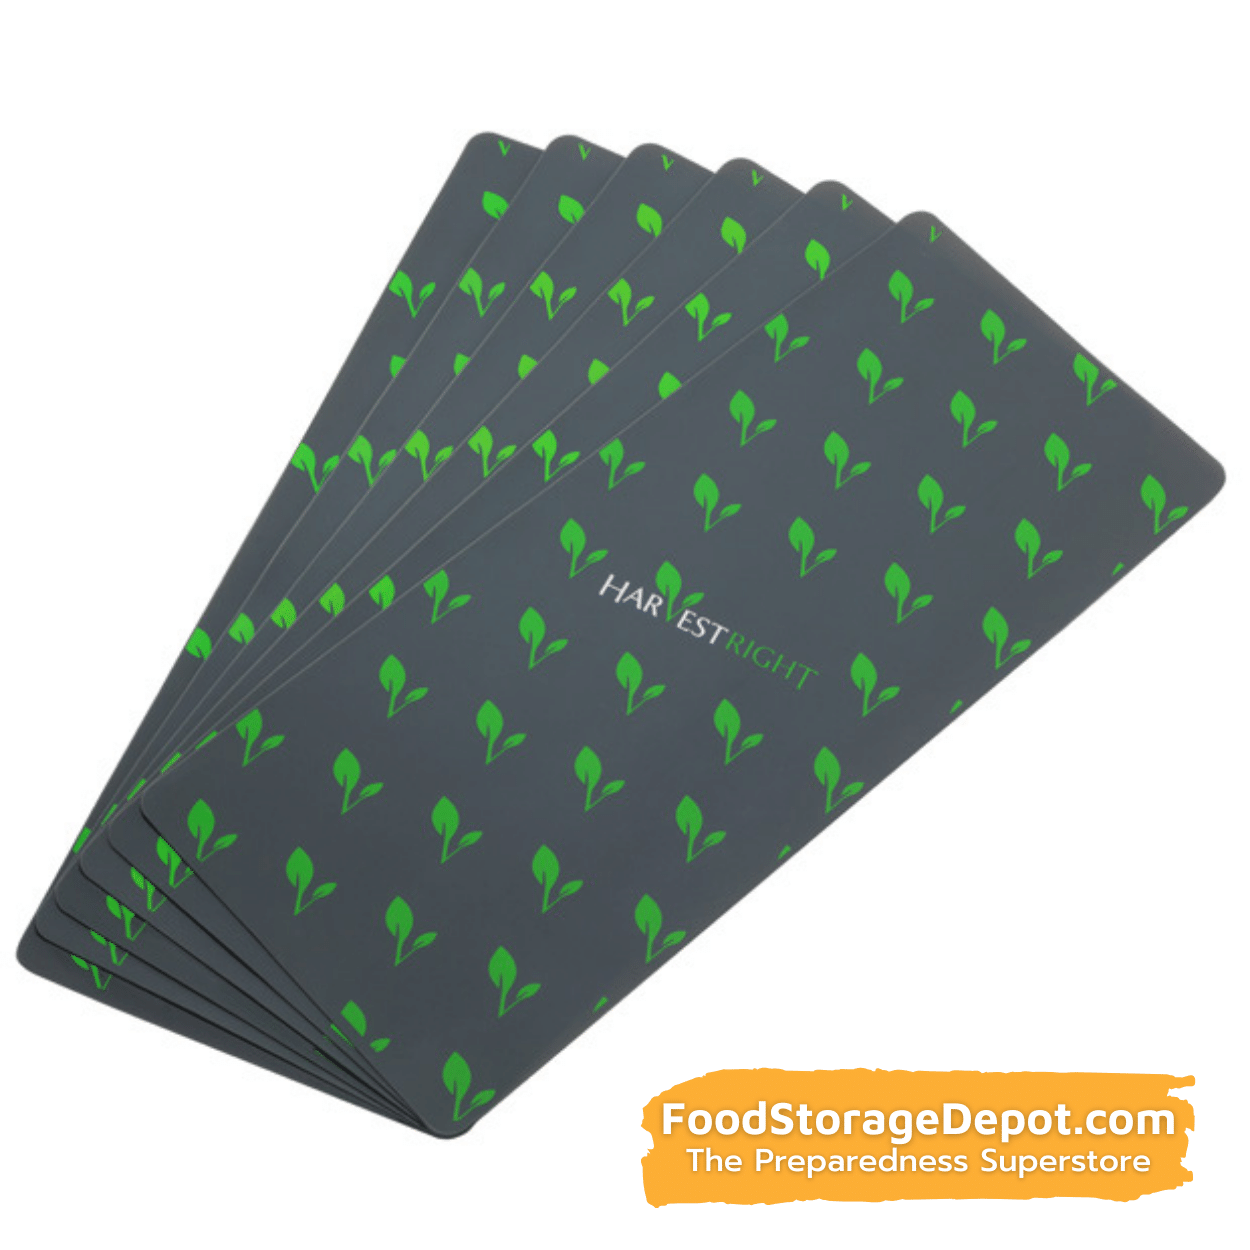 Harvest Right Pro Silicone Mats